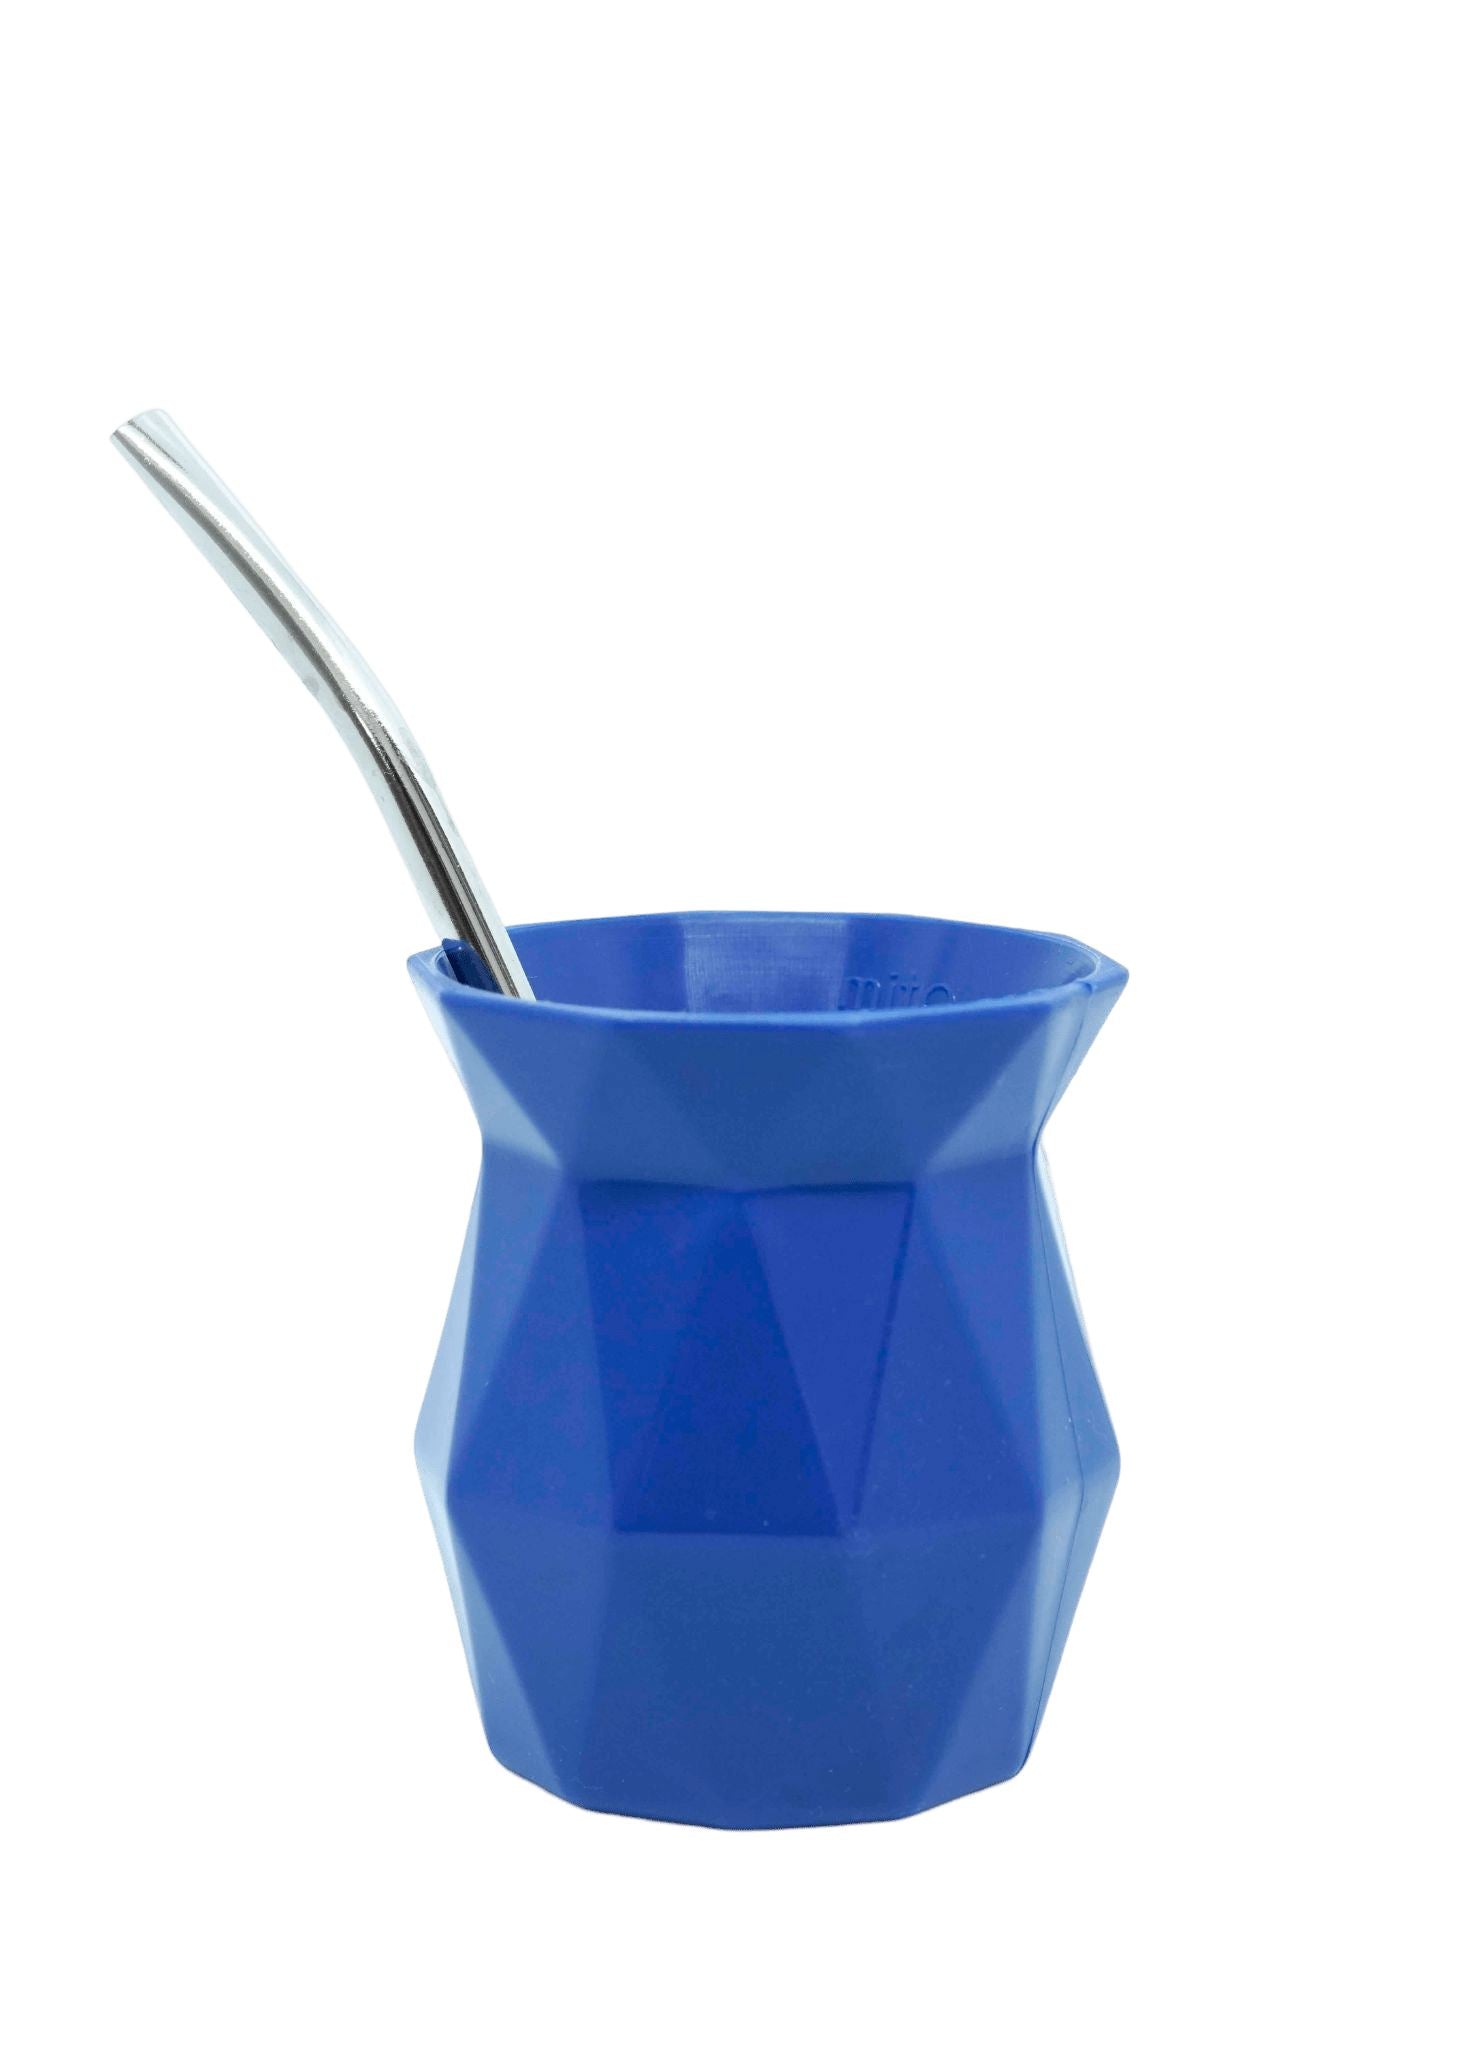 Mito Mate Gourd with Self-extracting Straw - Blue (Mate and Bombilla) Mates Hispanic Pantry 